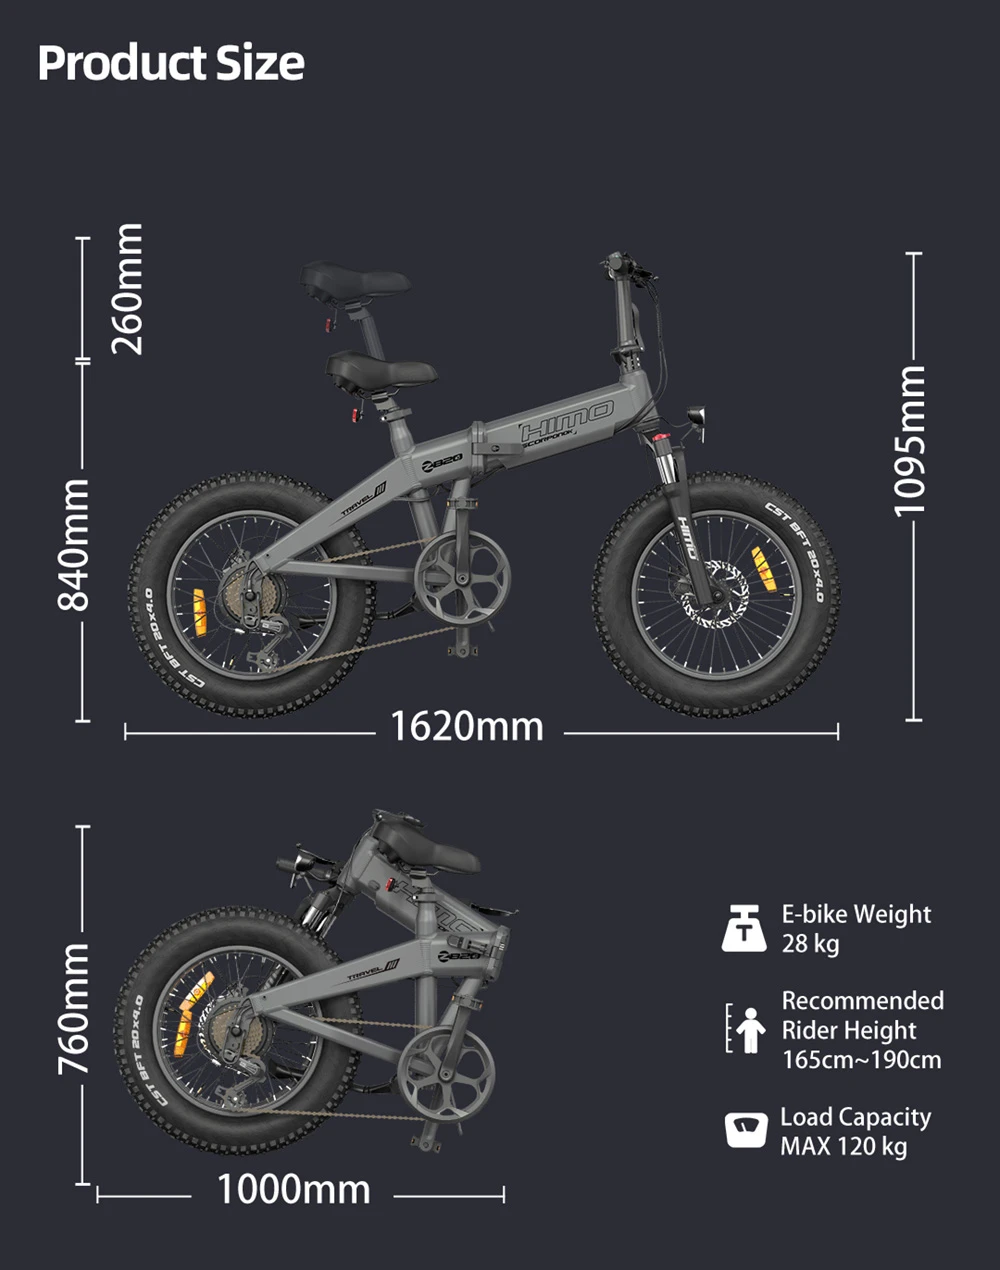 HIMO ZB20 MAX Global version Folding Electric Mountain Bike 20" Wheels 4 Inch Fat Wide Tires 250W Motor Shimano 6 Speeds Derailleur 48V 10Ah Detachable Lithium Battery Dual Disc Brake Hydraulic Shock Folk LCD Display Up to 80km - Grey